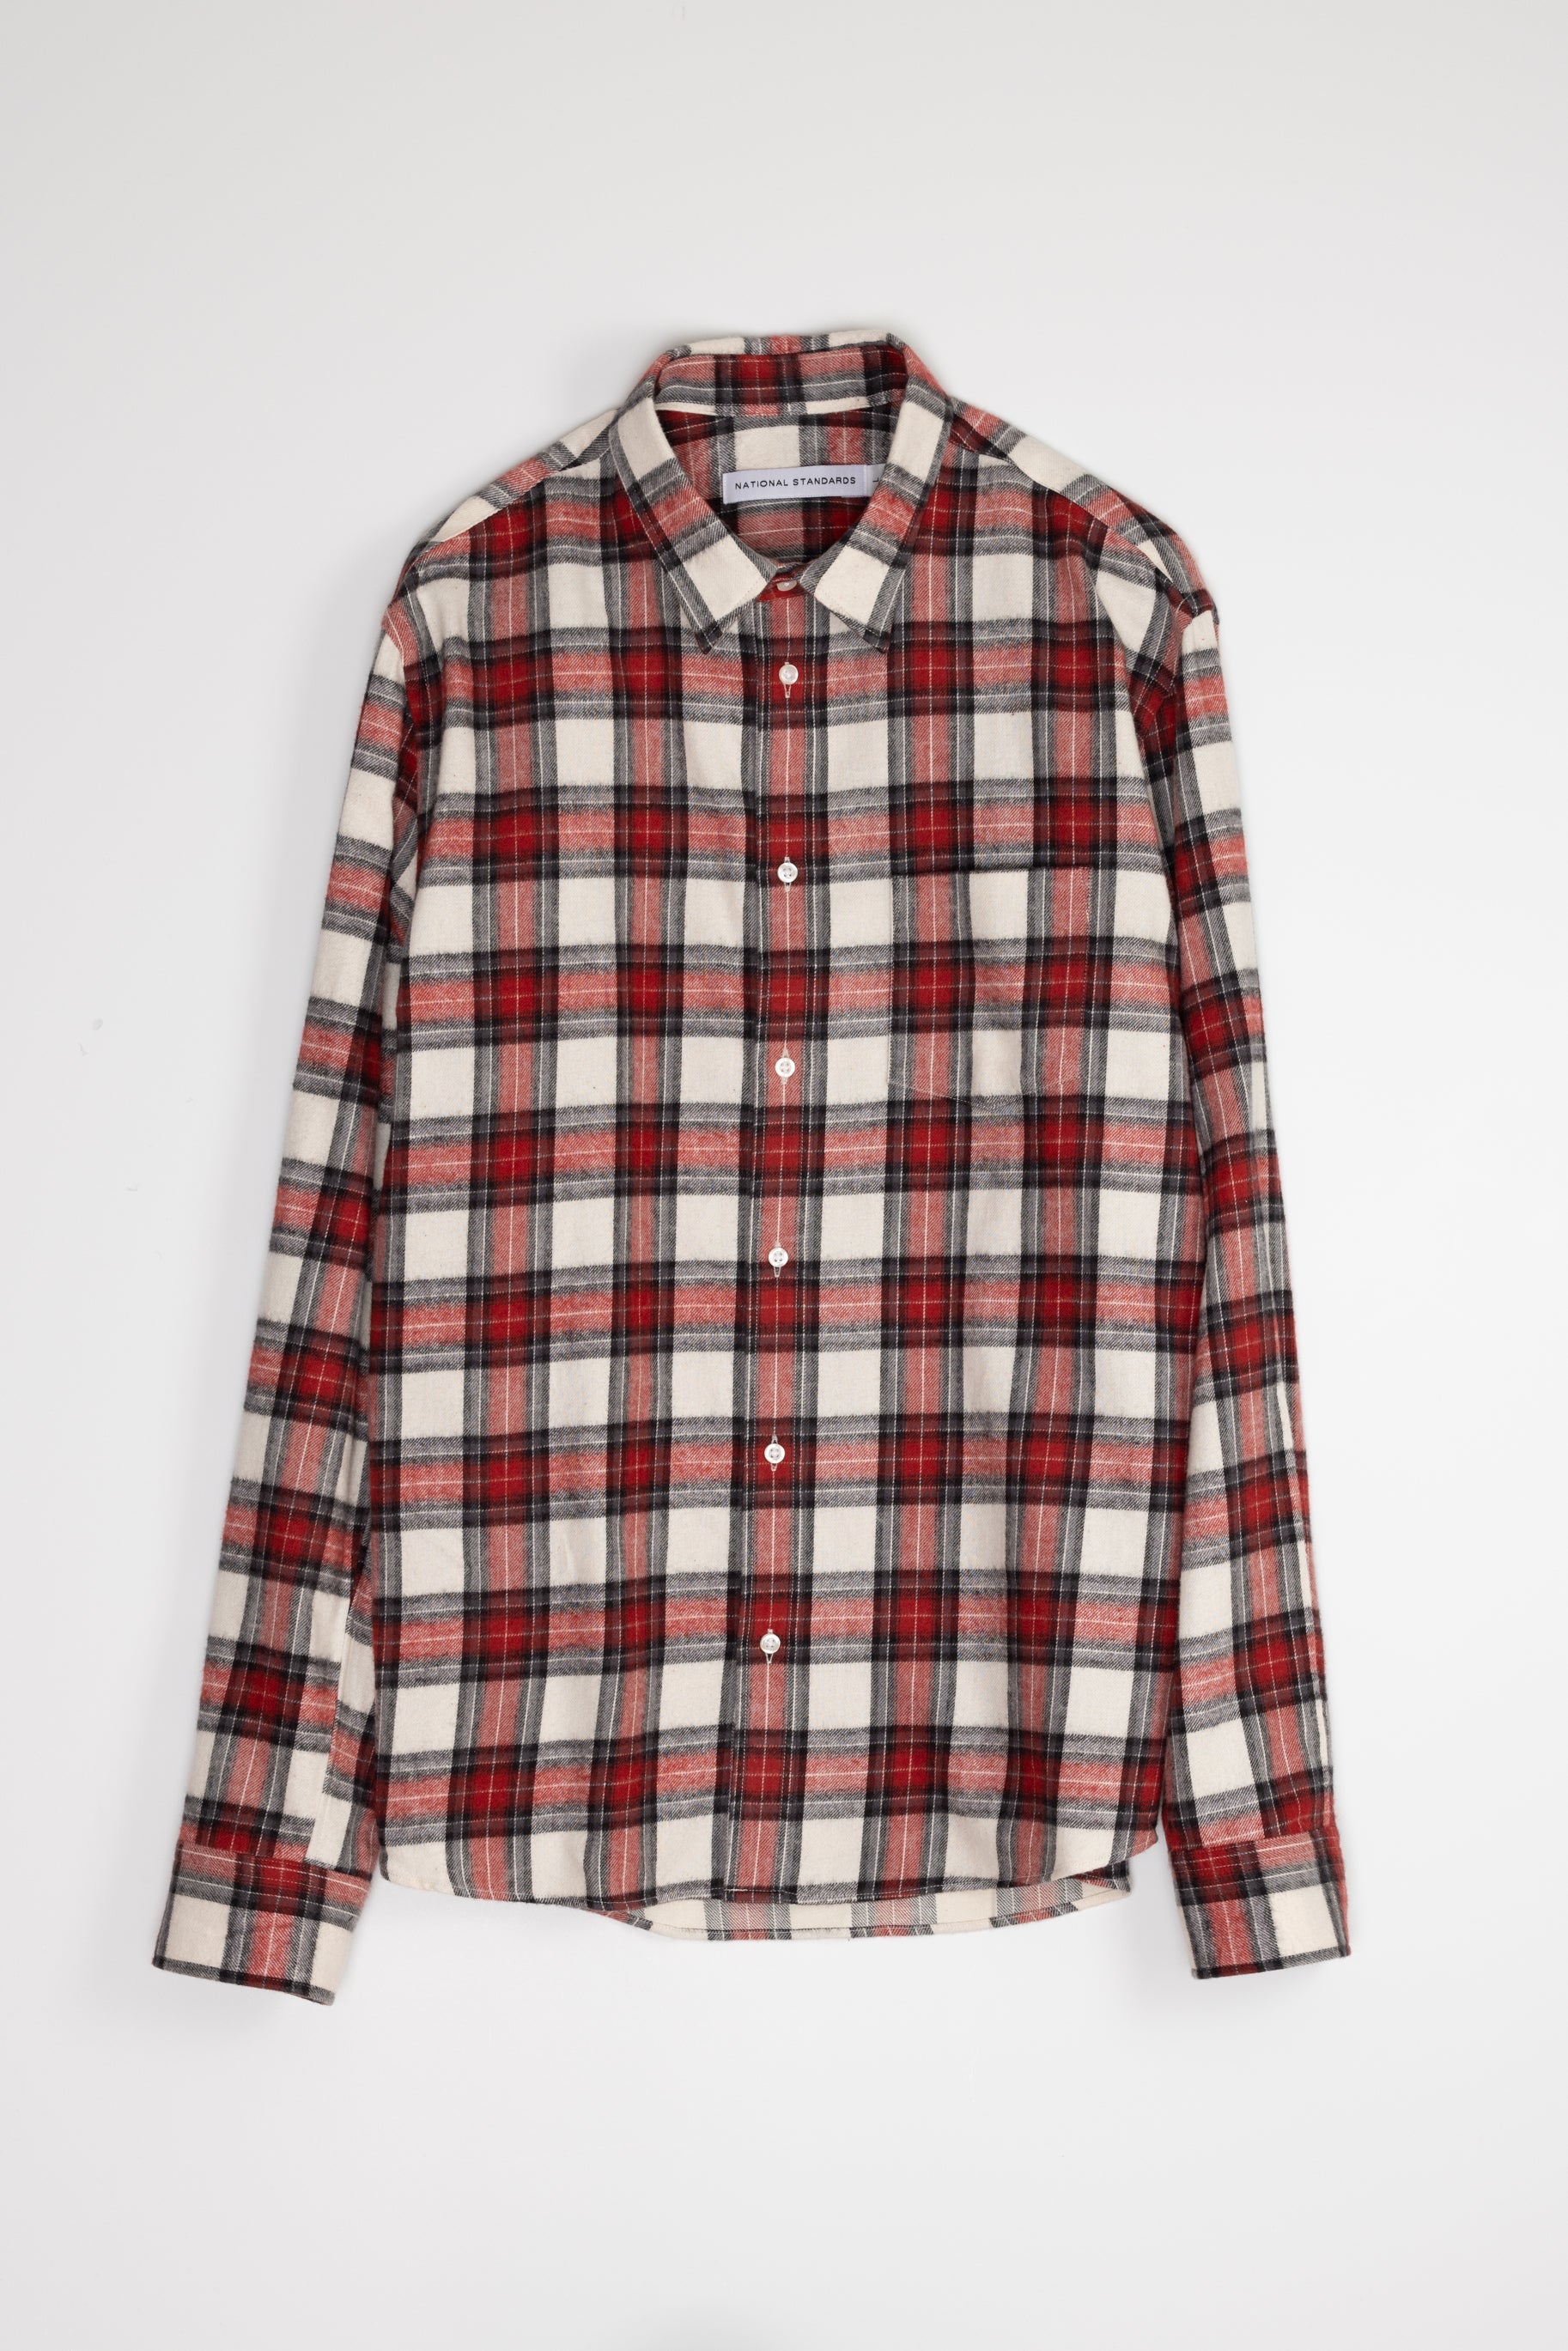 Japanese Shaggy Tartan in Red and Grey 01